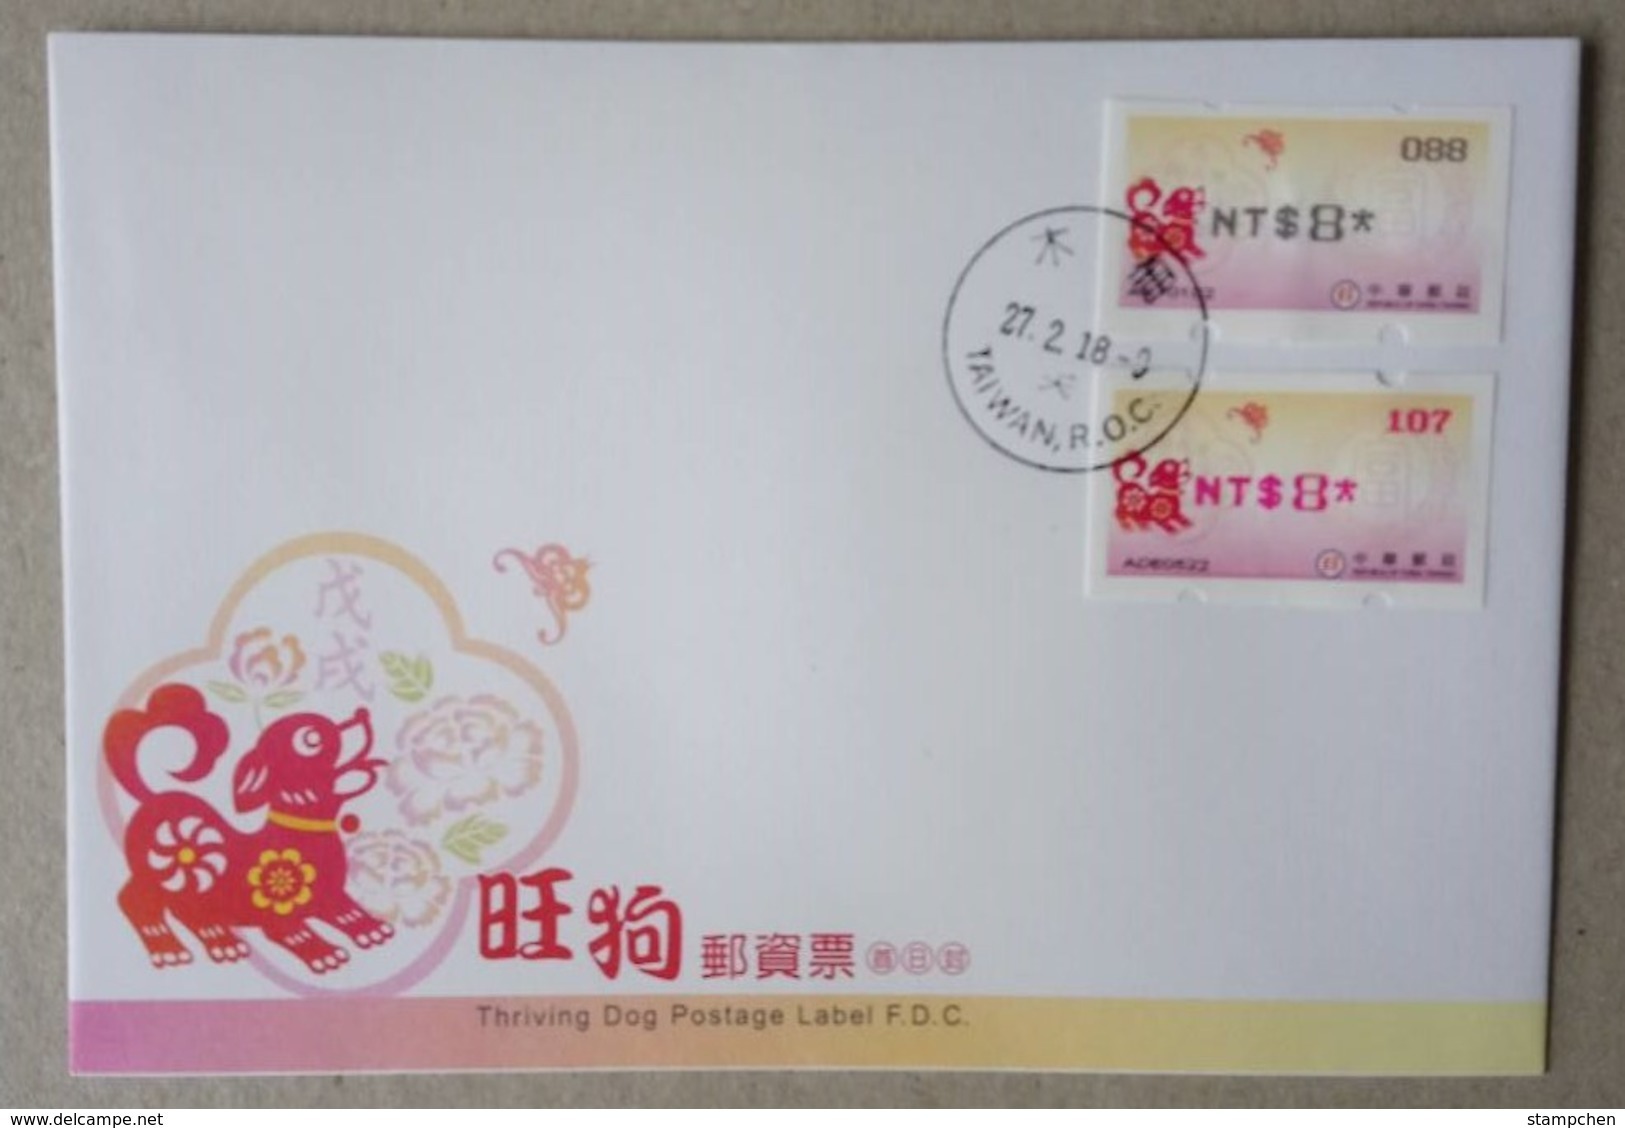 FDC Taiwan Red & Black ATM Frama Stamp-2018 Year Of Auspicious Dog Chinese New Year Bat Unusual - FDC